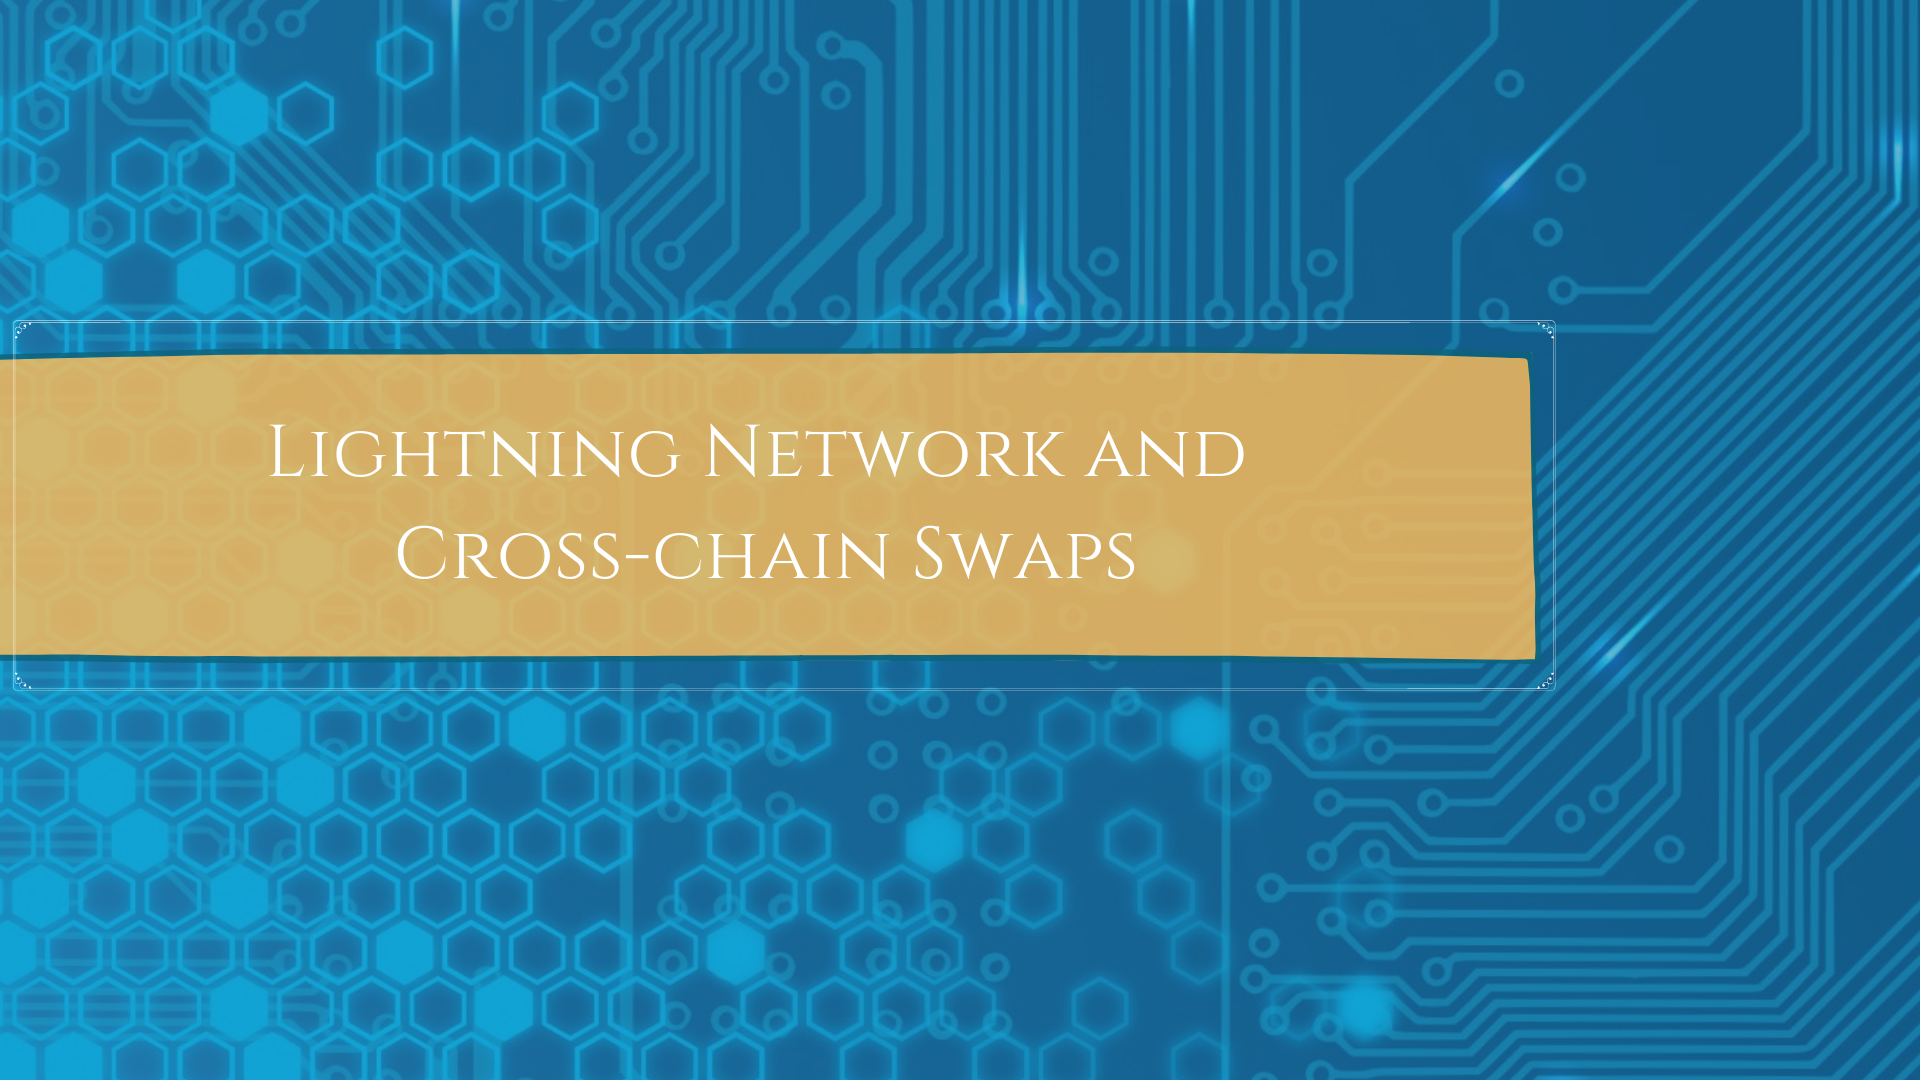 Lightning Network and Cross-chain Swaps